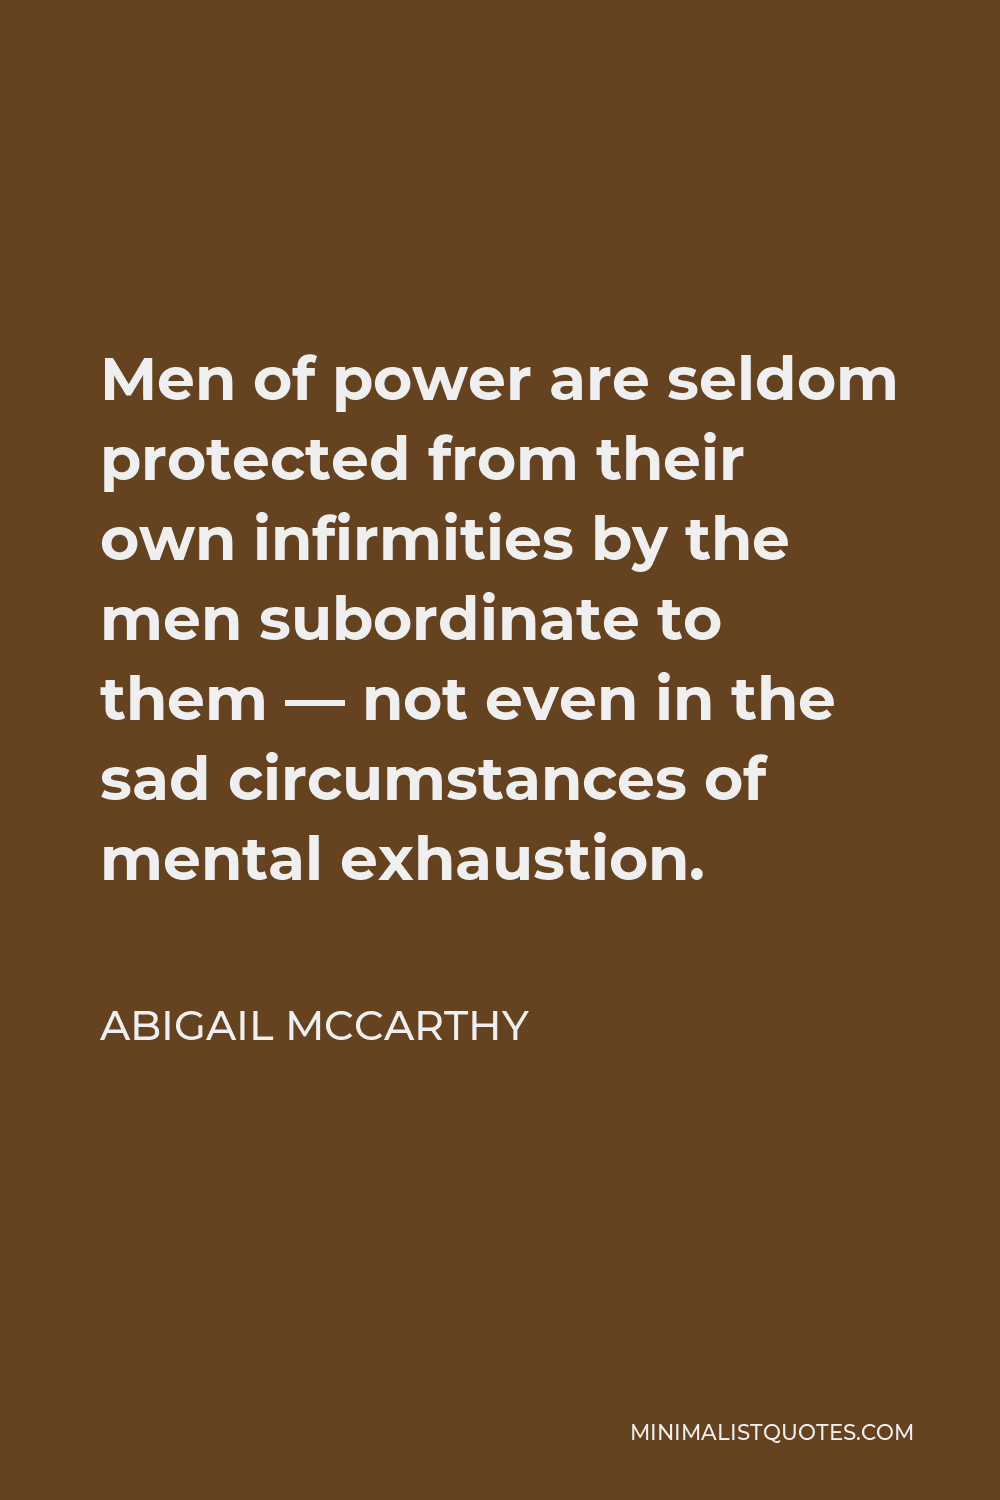 Abigail McCarthy Quote - Men of power are seldom protected from their own infirmities by the men subordinate to them — not even in the sad circumstances of mental exhaustion.